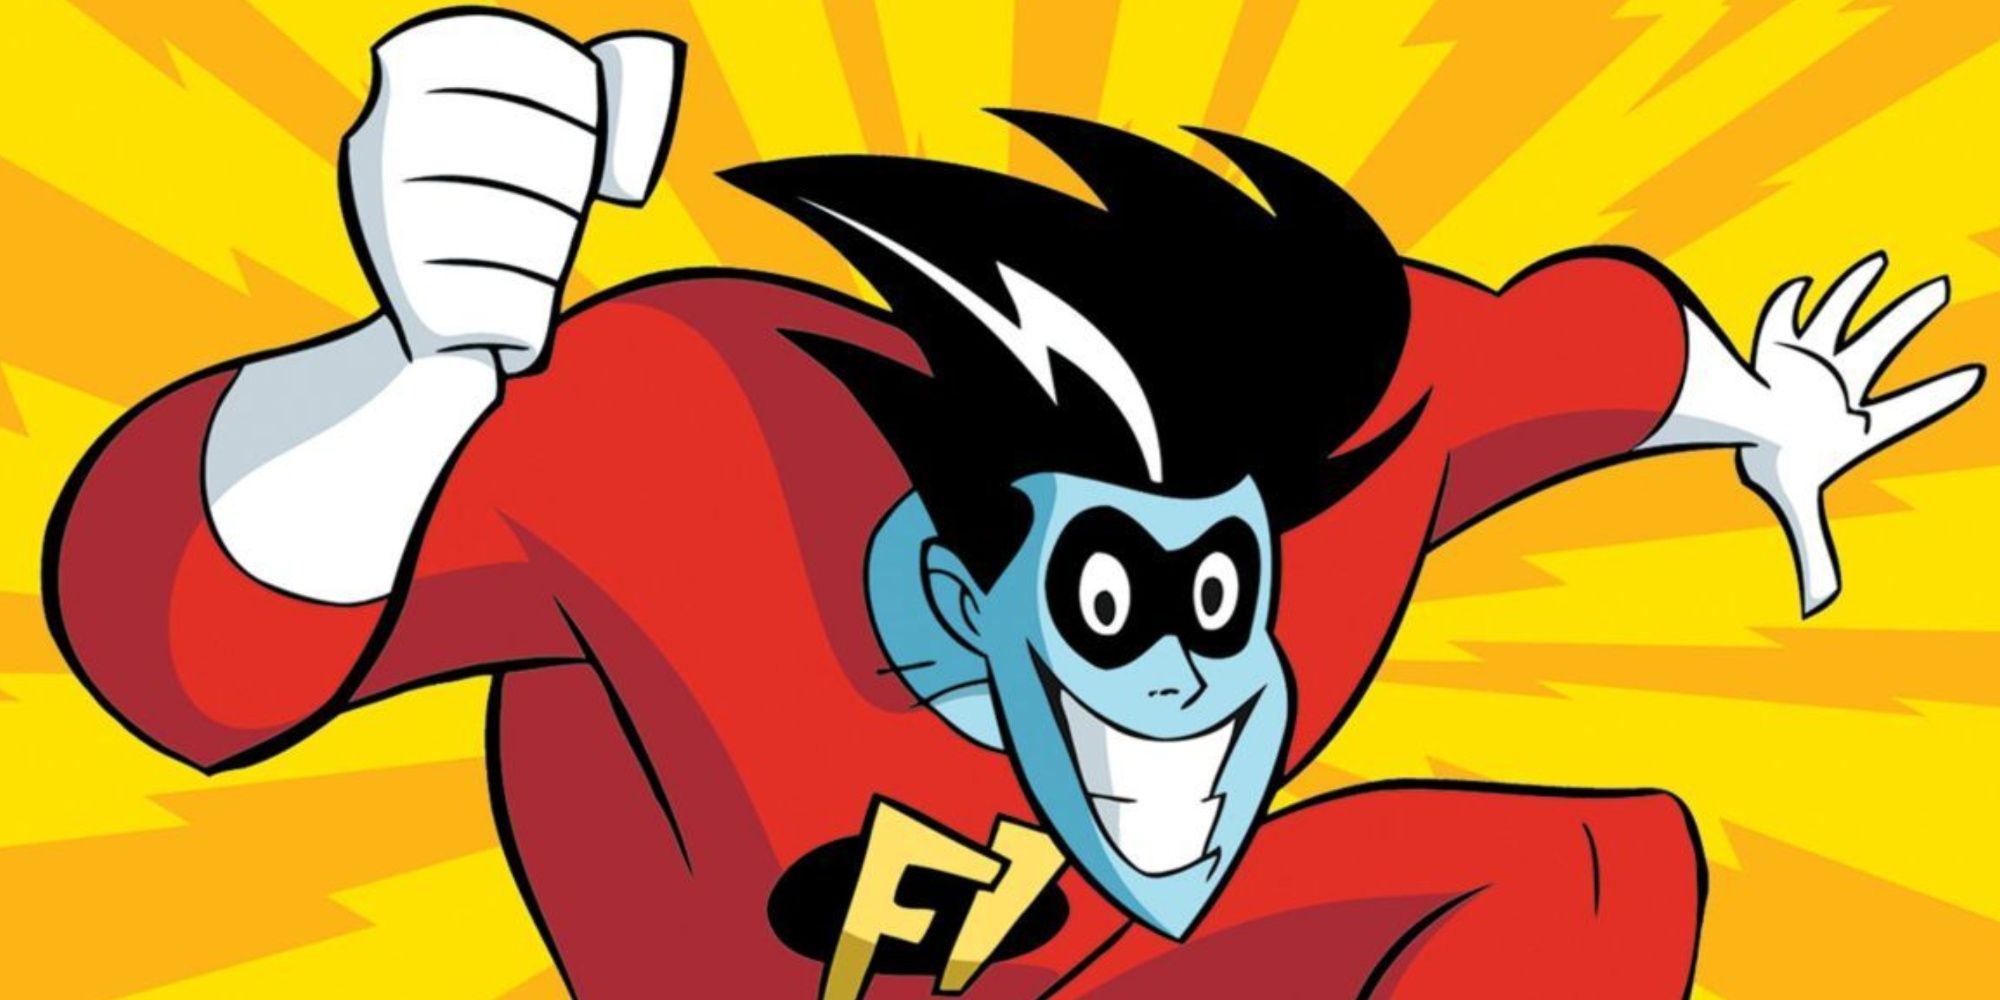 Close-up of Freakazoid from the animated series in the red superhero costume amid a yellow and orange background.